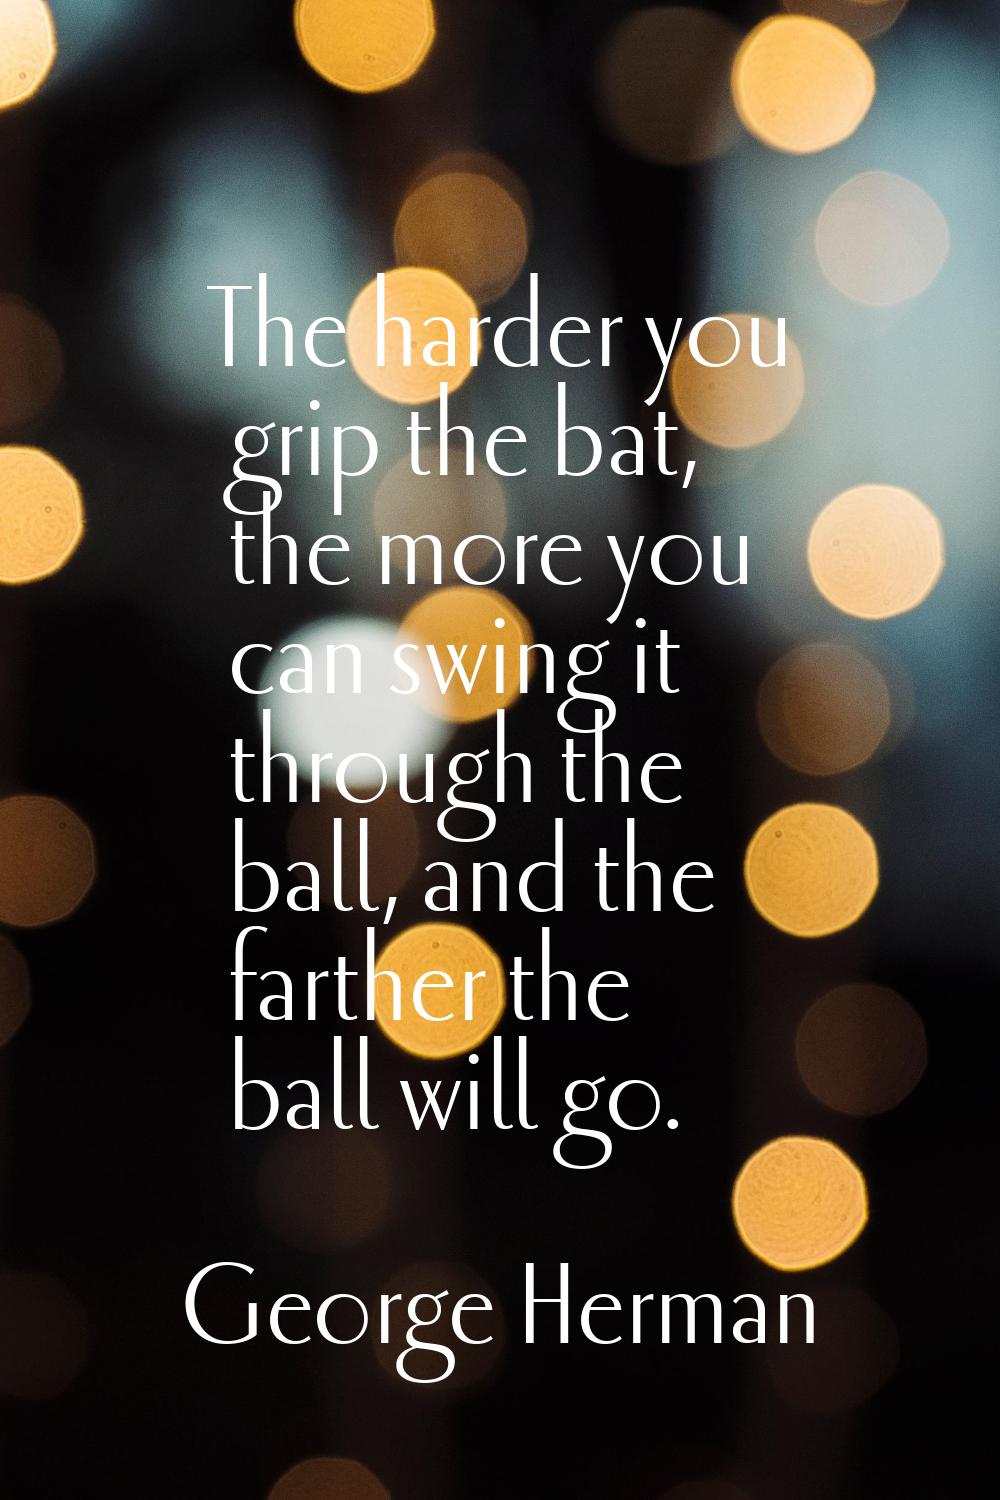 The harder you grip the bat, the more you can swing it through the ball, and the farther the ball w